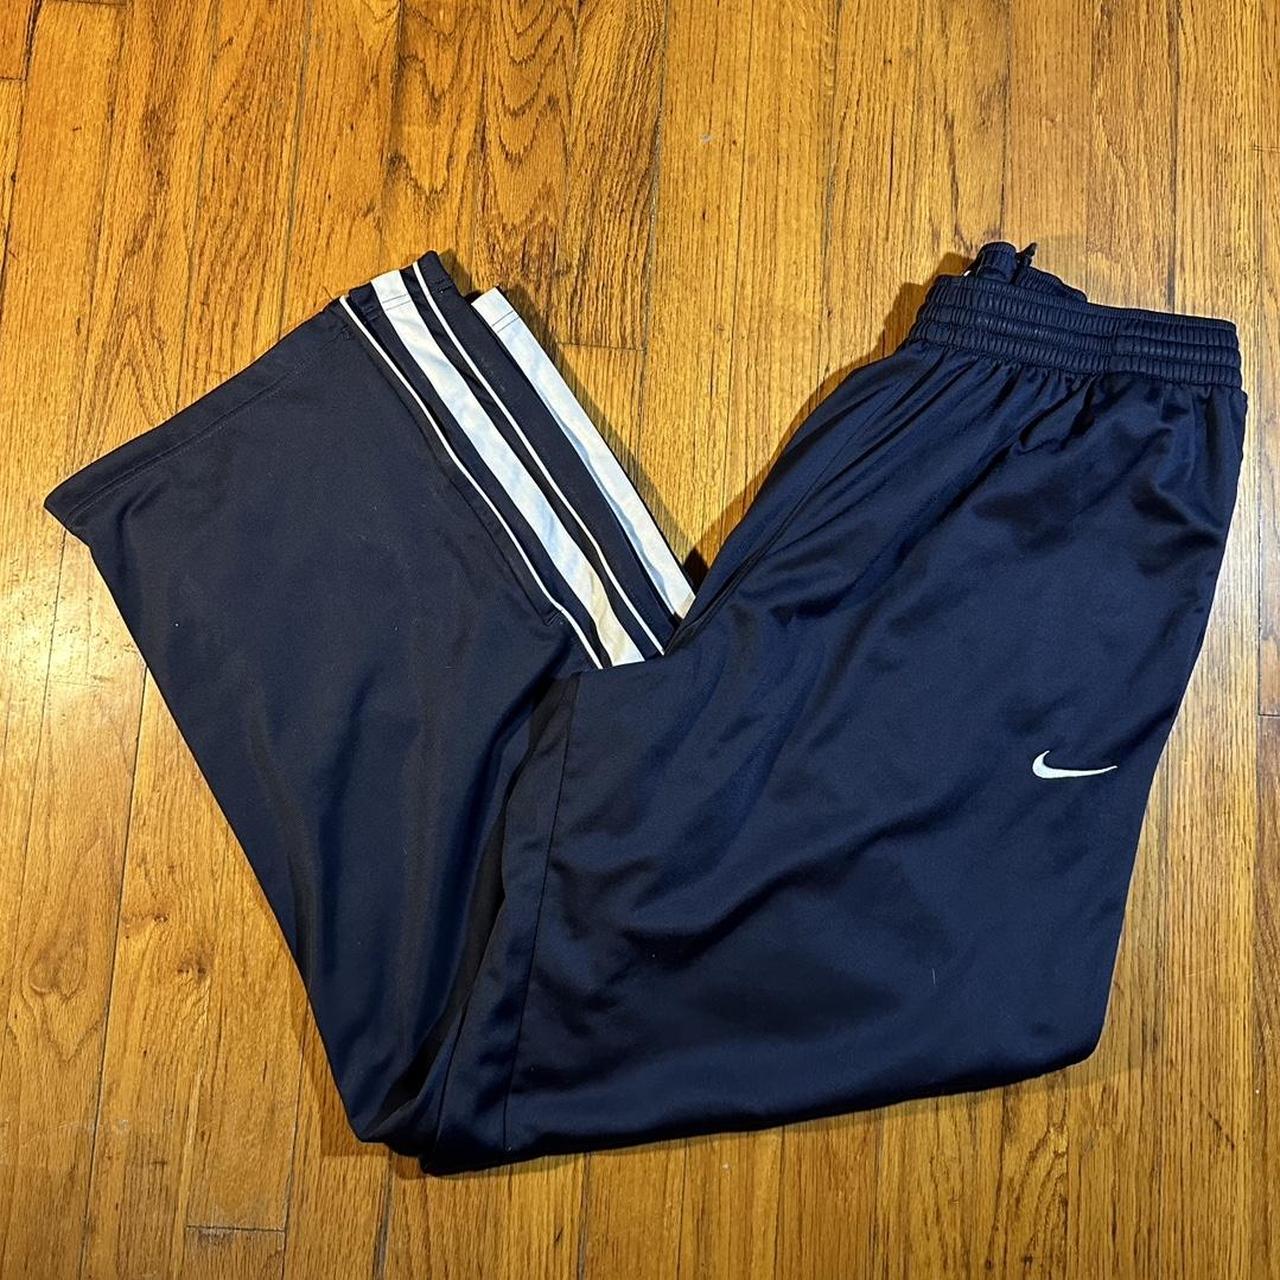 Nike Sweatpants Amazing Condition No Flaws Dm for... - Depop